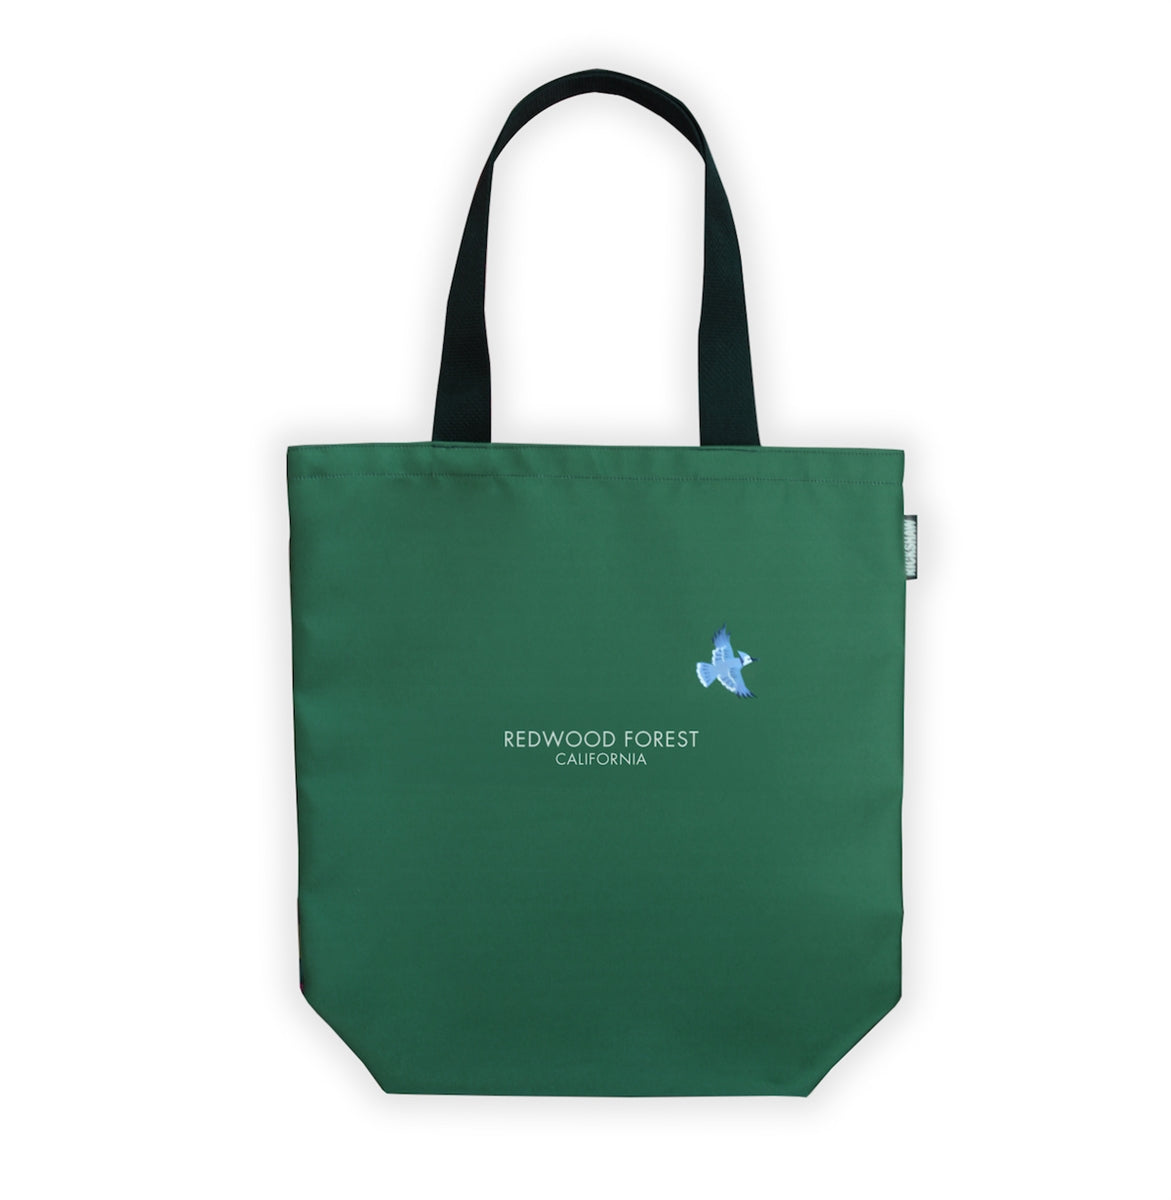 Green tote bag with black handle, words "Redwood Forest California" printed in white at center with illustration of blue bird.